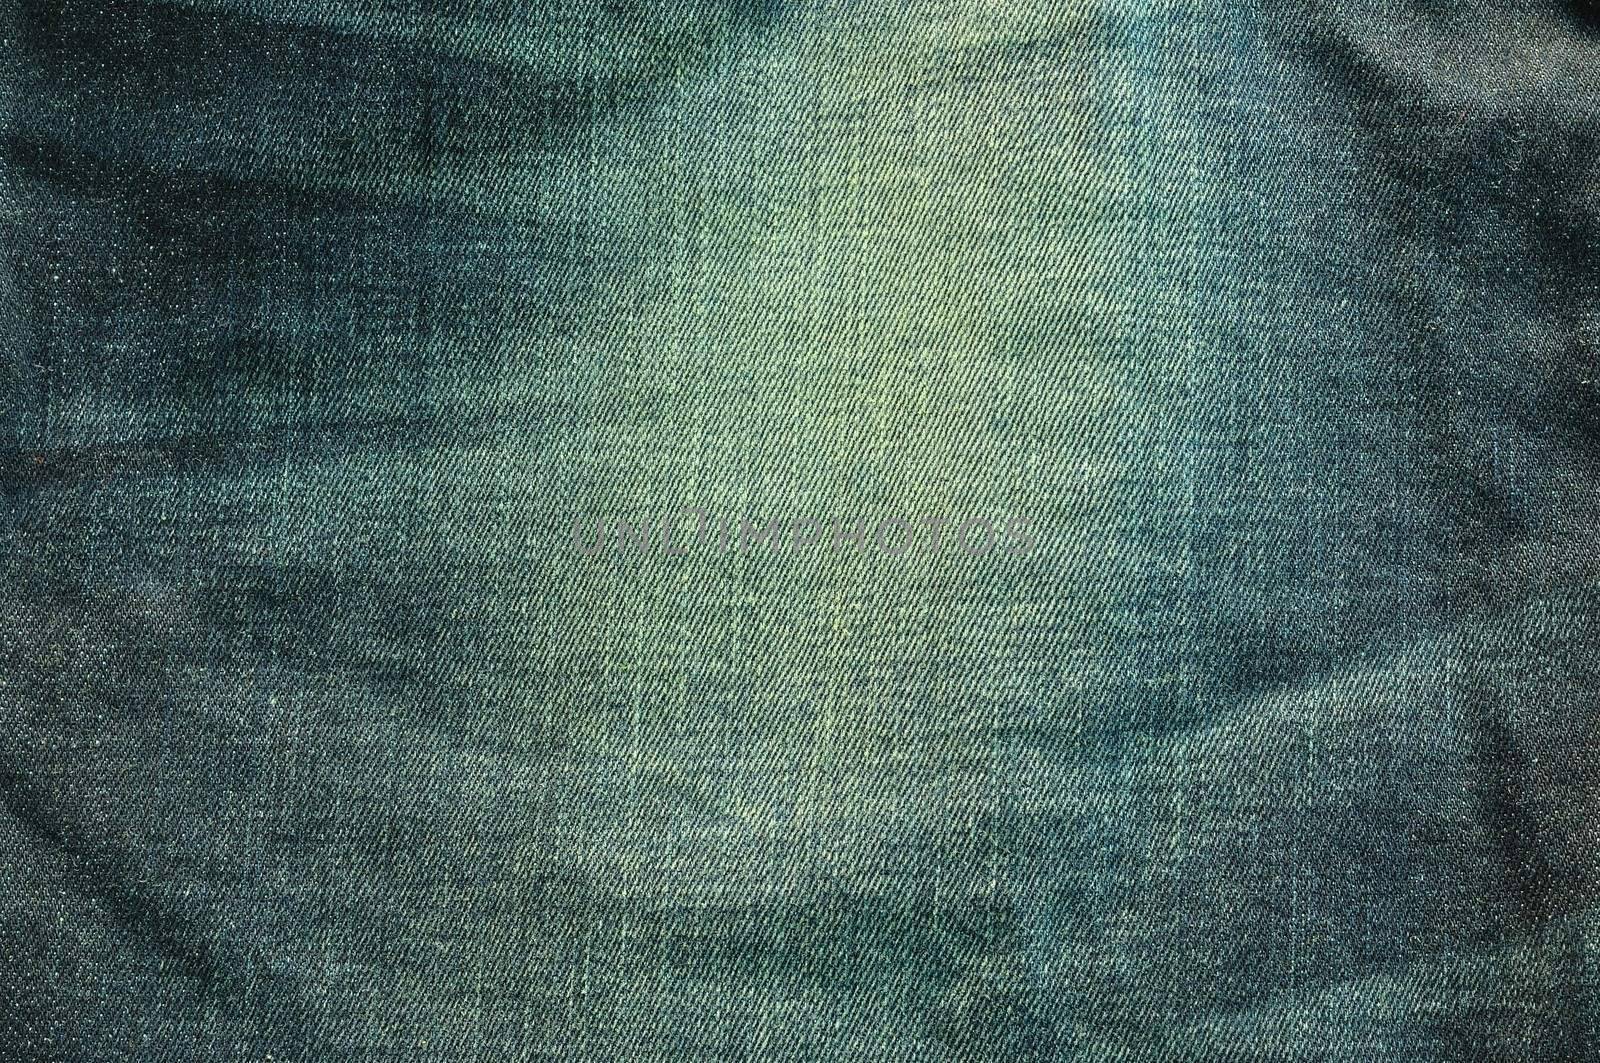 Texture Background of grunge blue jeans by thampapon